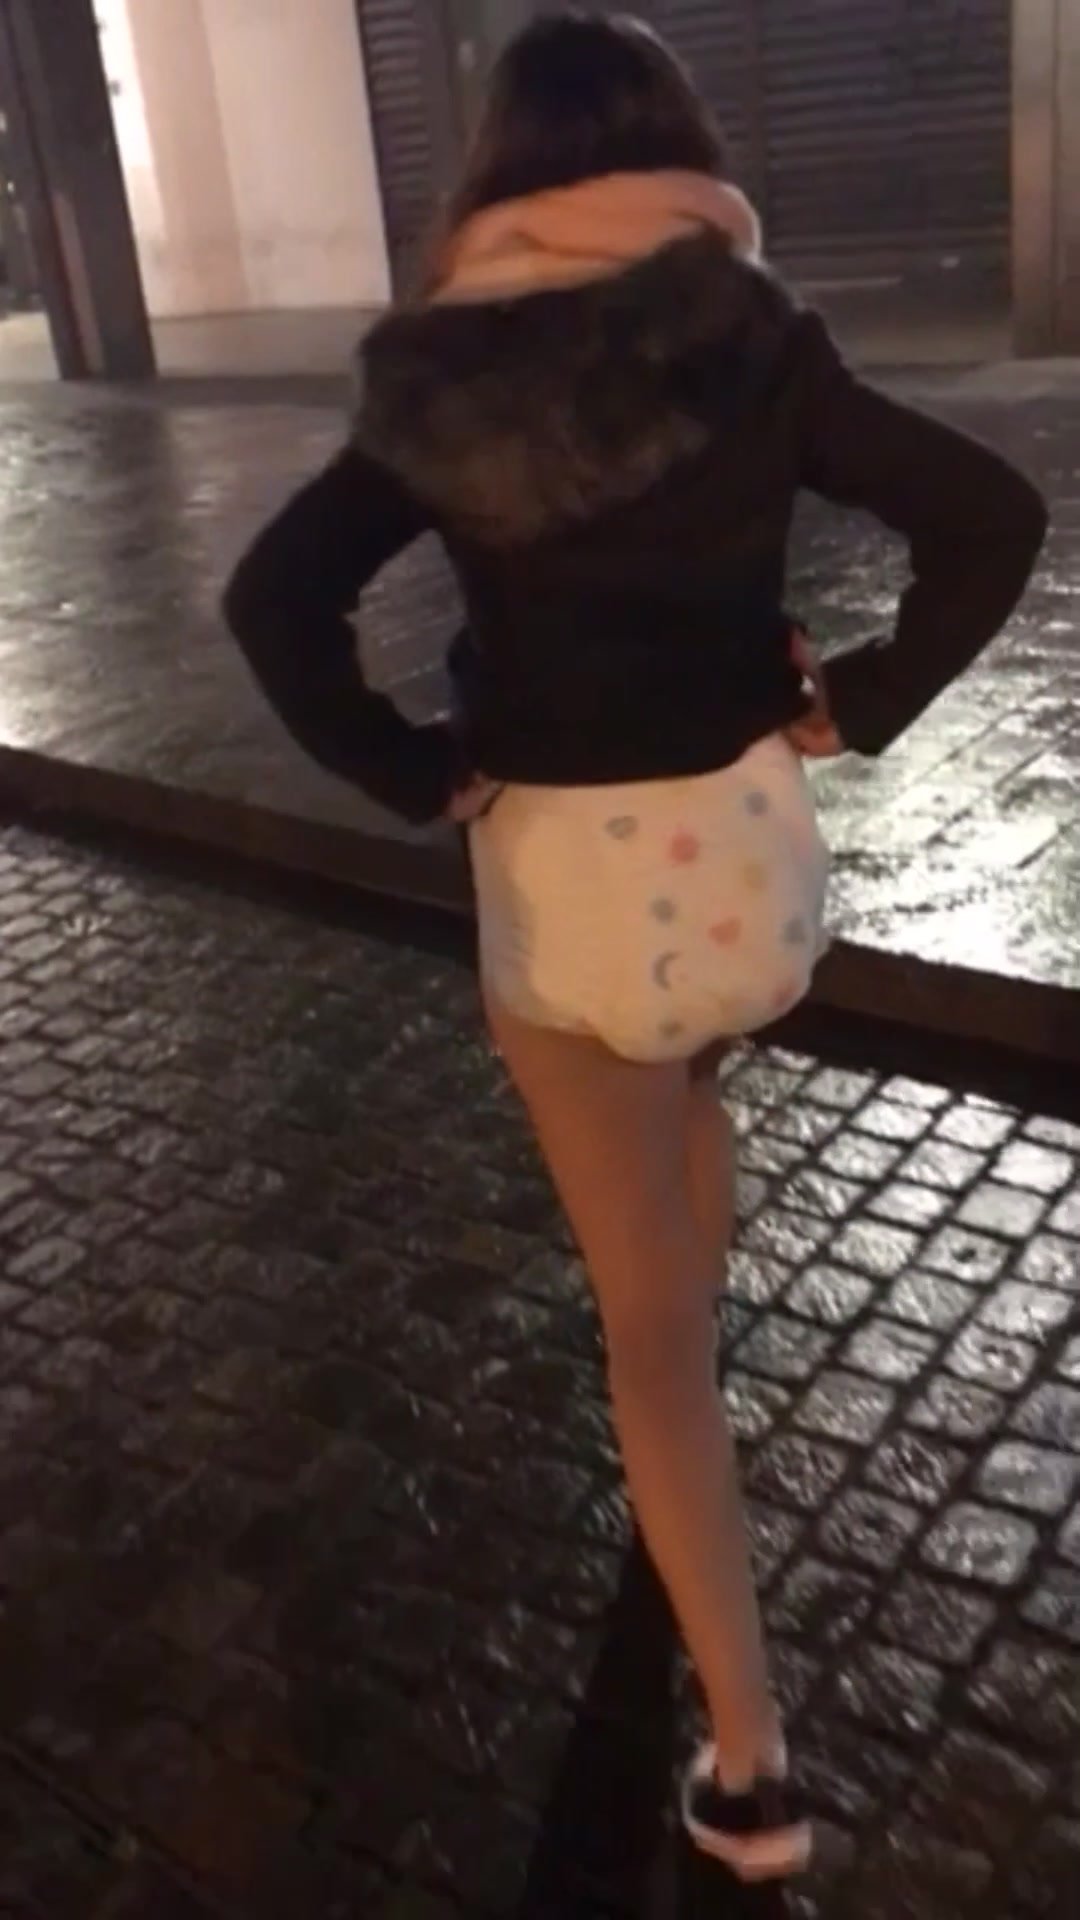 Girl shows her diaper in public at night